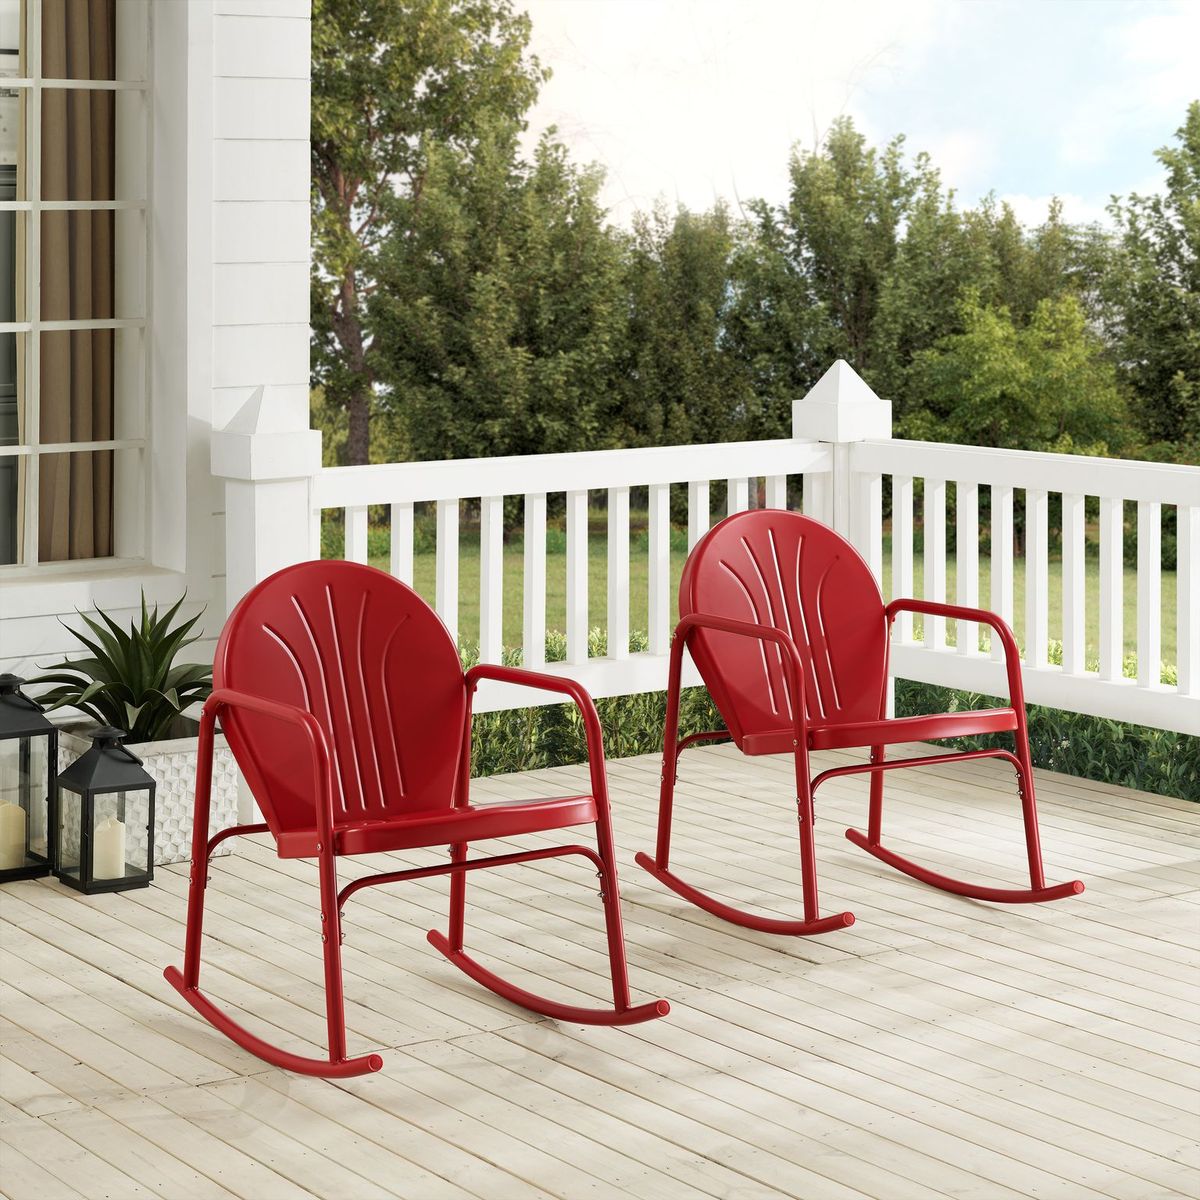 Co1013-re Outdoor Rocking Chair Set, Bright Red Gloss - 2 Chairs - 2 Piece